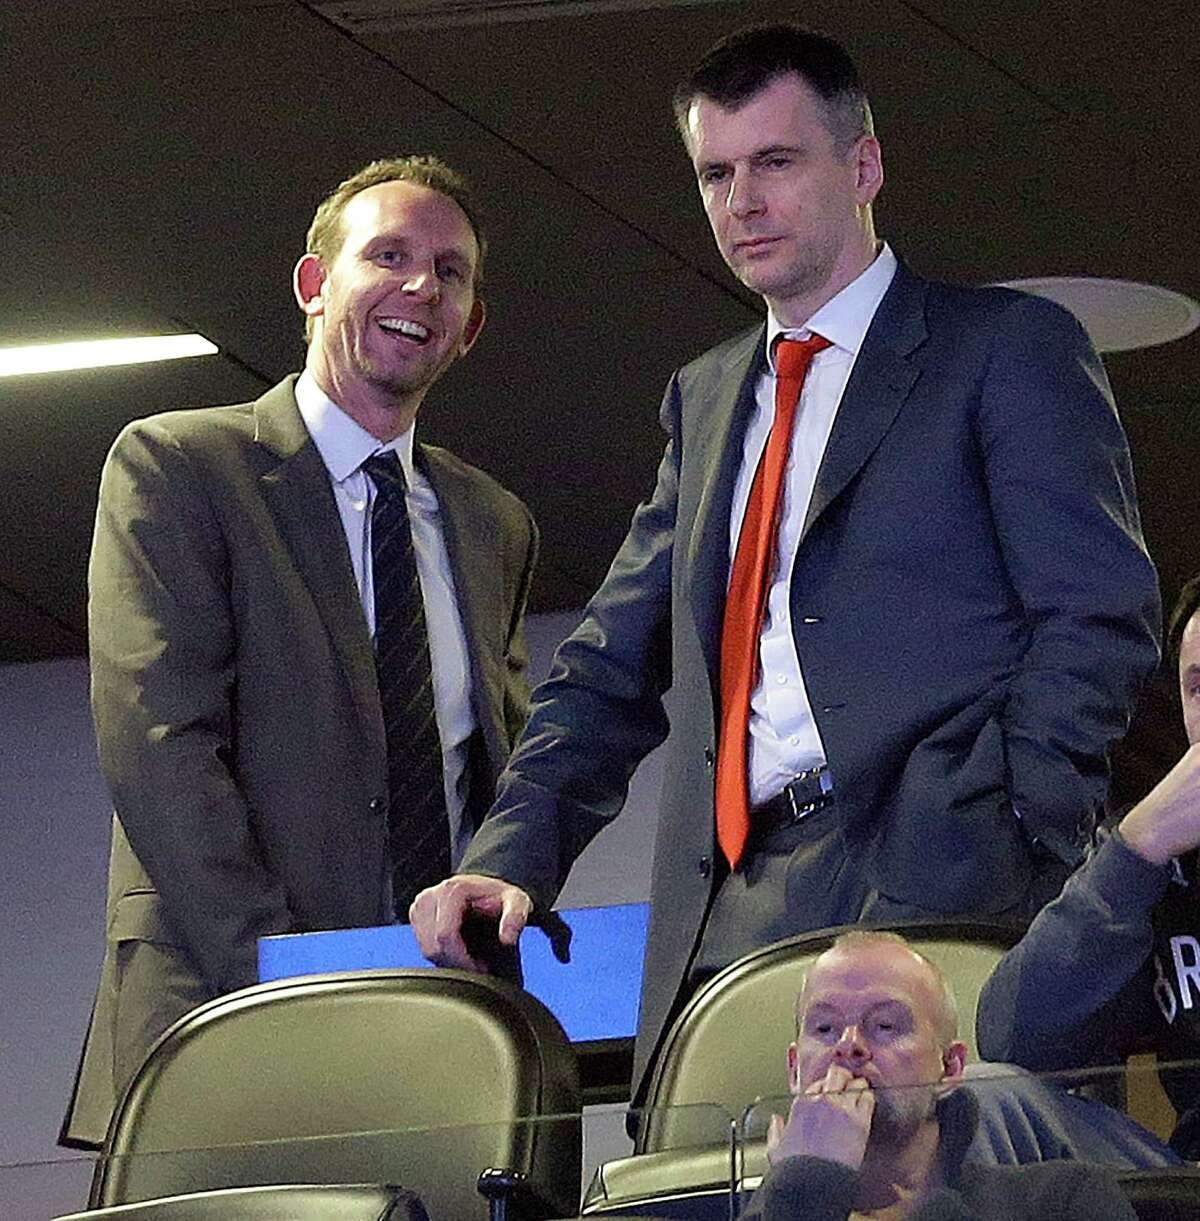 Brooklyn Nets general manager Sean Marks, left, talks with team owner Mikhail Prokhorov before an NBA basketball game between the Nets and the New York Knicks, Friday, Feb. 19, 2016, in New York. (AP Photo/Julie Jacobson)